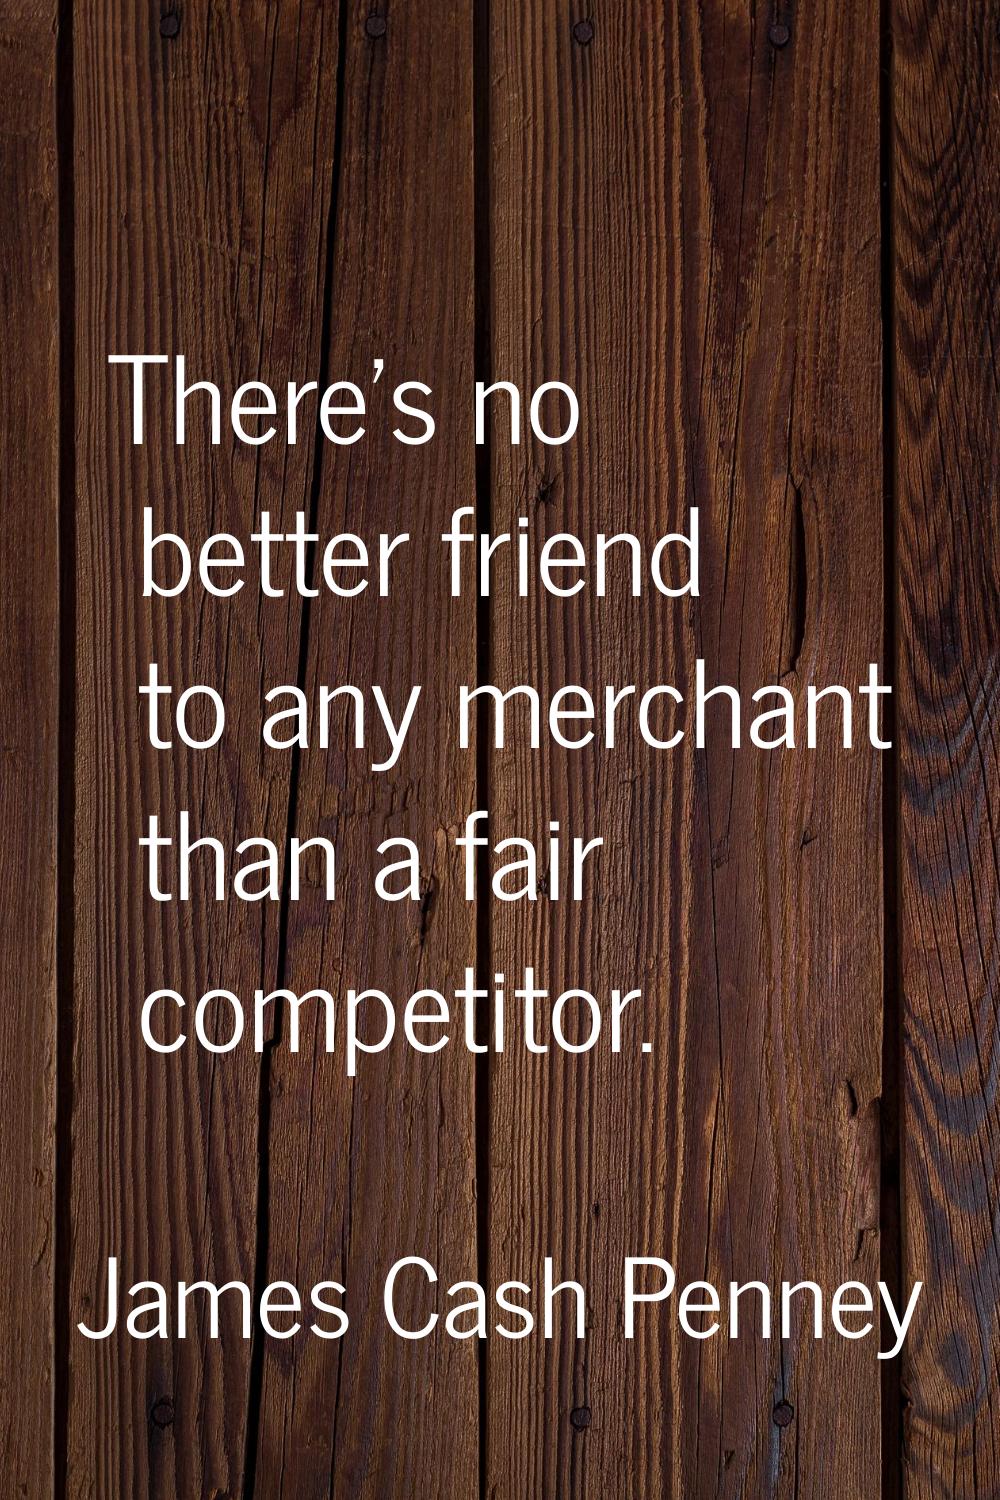 There's no better friend to any merchant than a fair competitor.